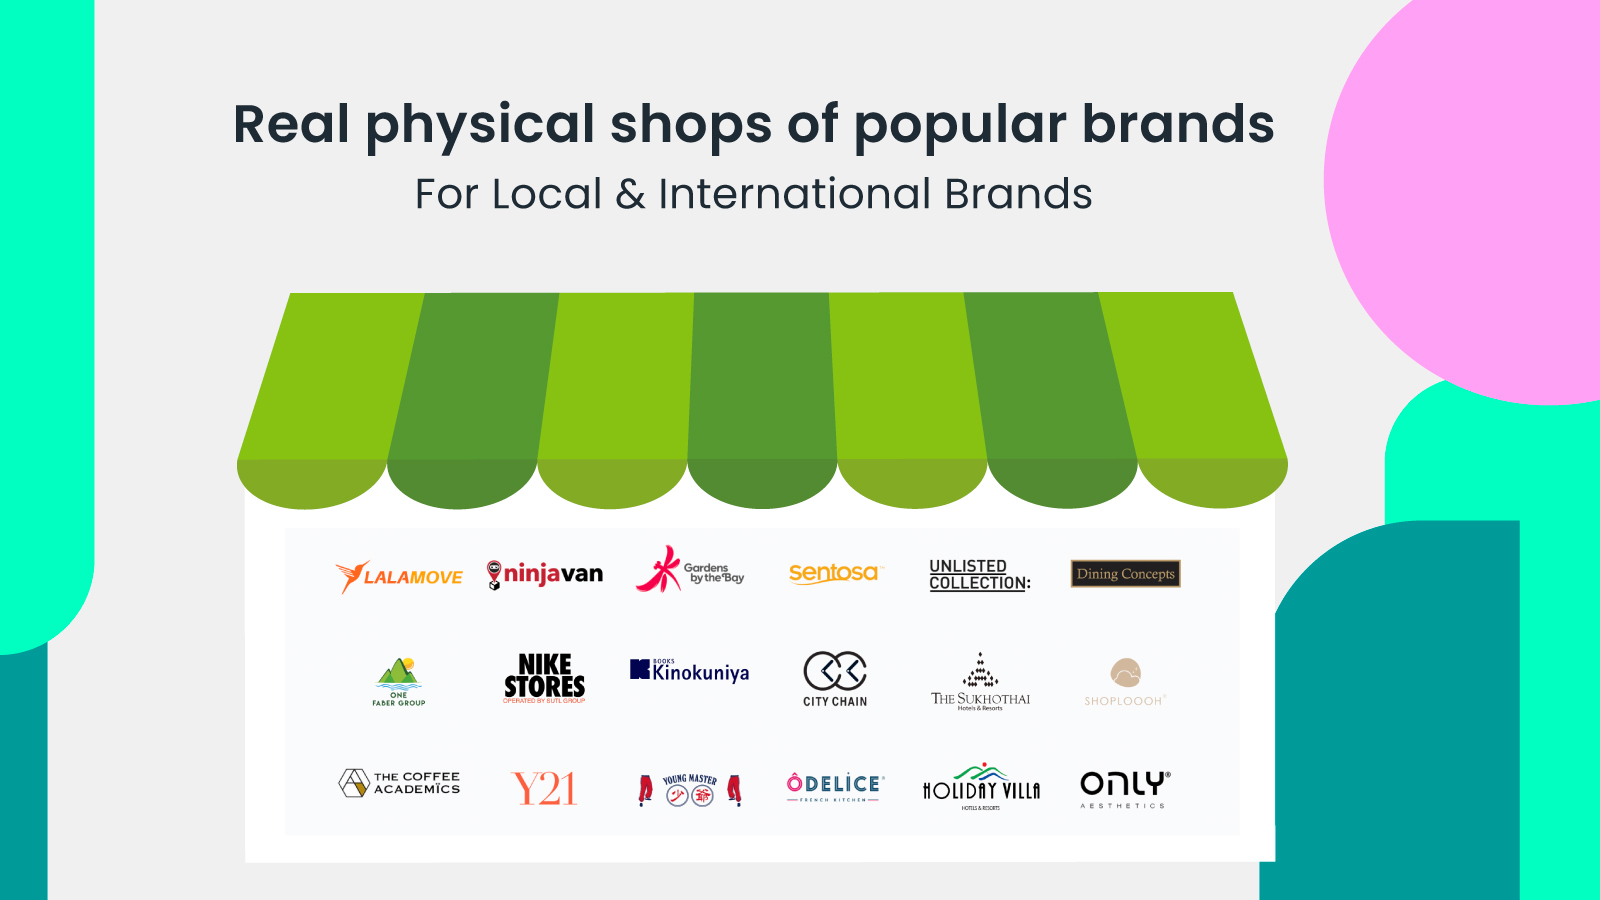 Real Physical Shops of Popular Brands